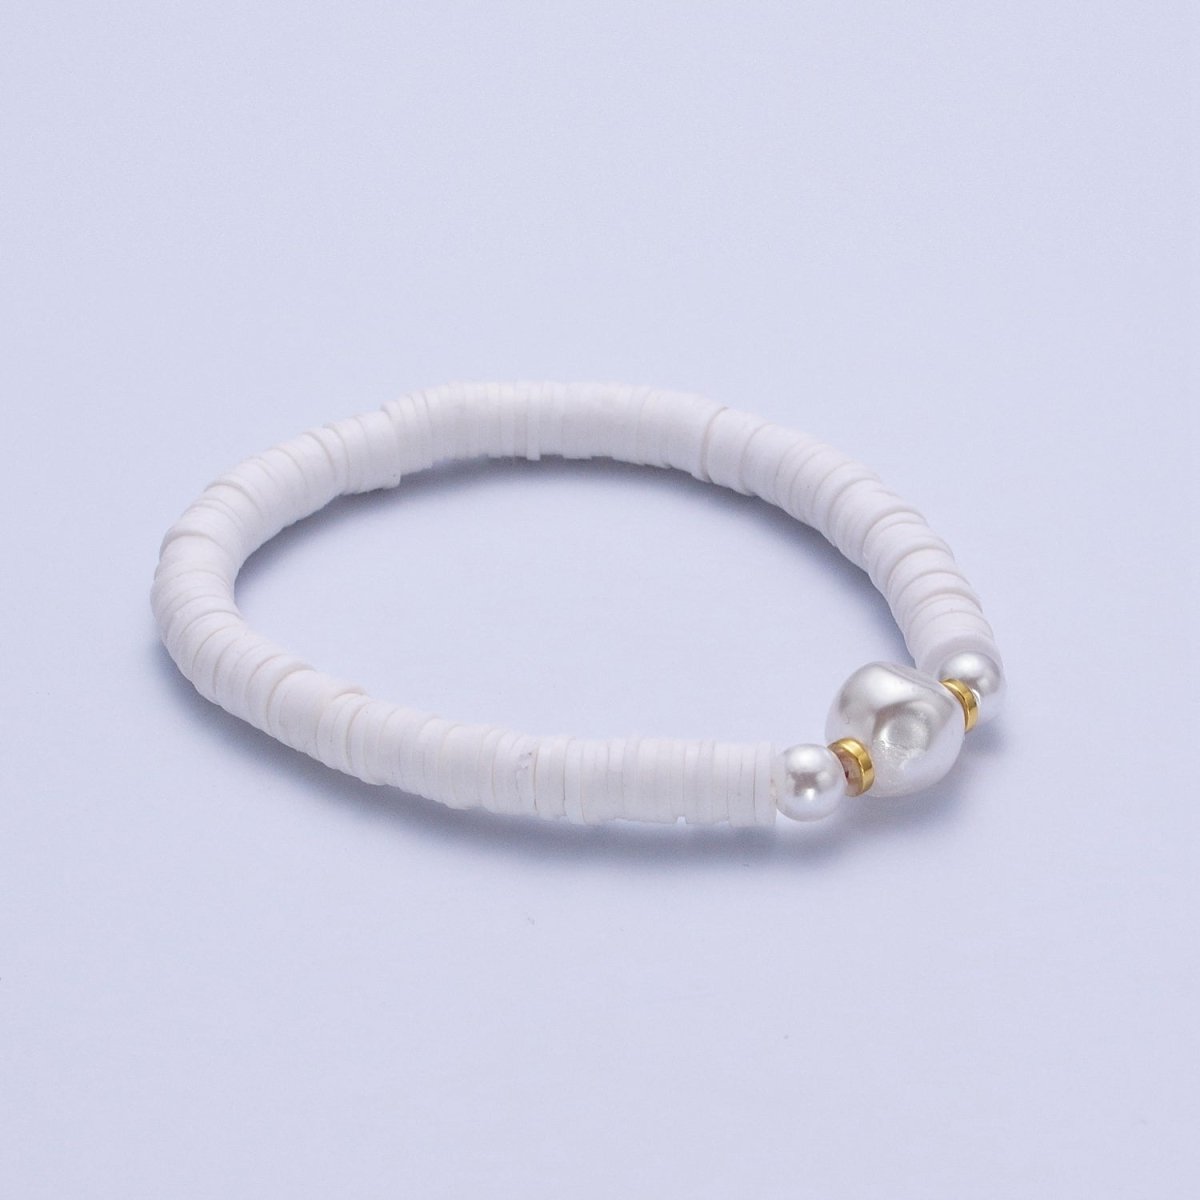 Heishi Bead Bracelet with Fresh Water Pearl, Arm Candy Bracelet Summer Stackable Bracelet | WA-1072 to WA-1085 Clearance Pricing - DLUXCA